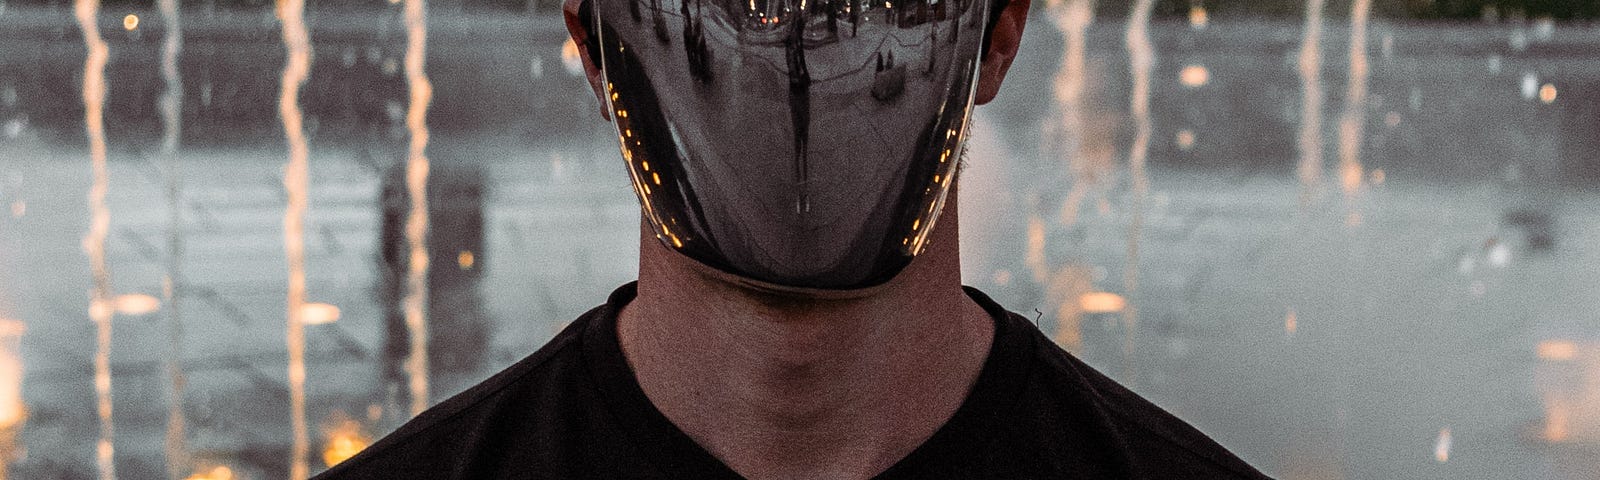 Man wearing mask made of reflective material.